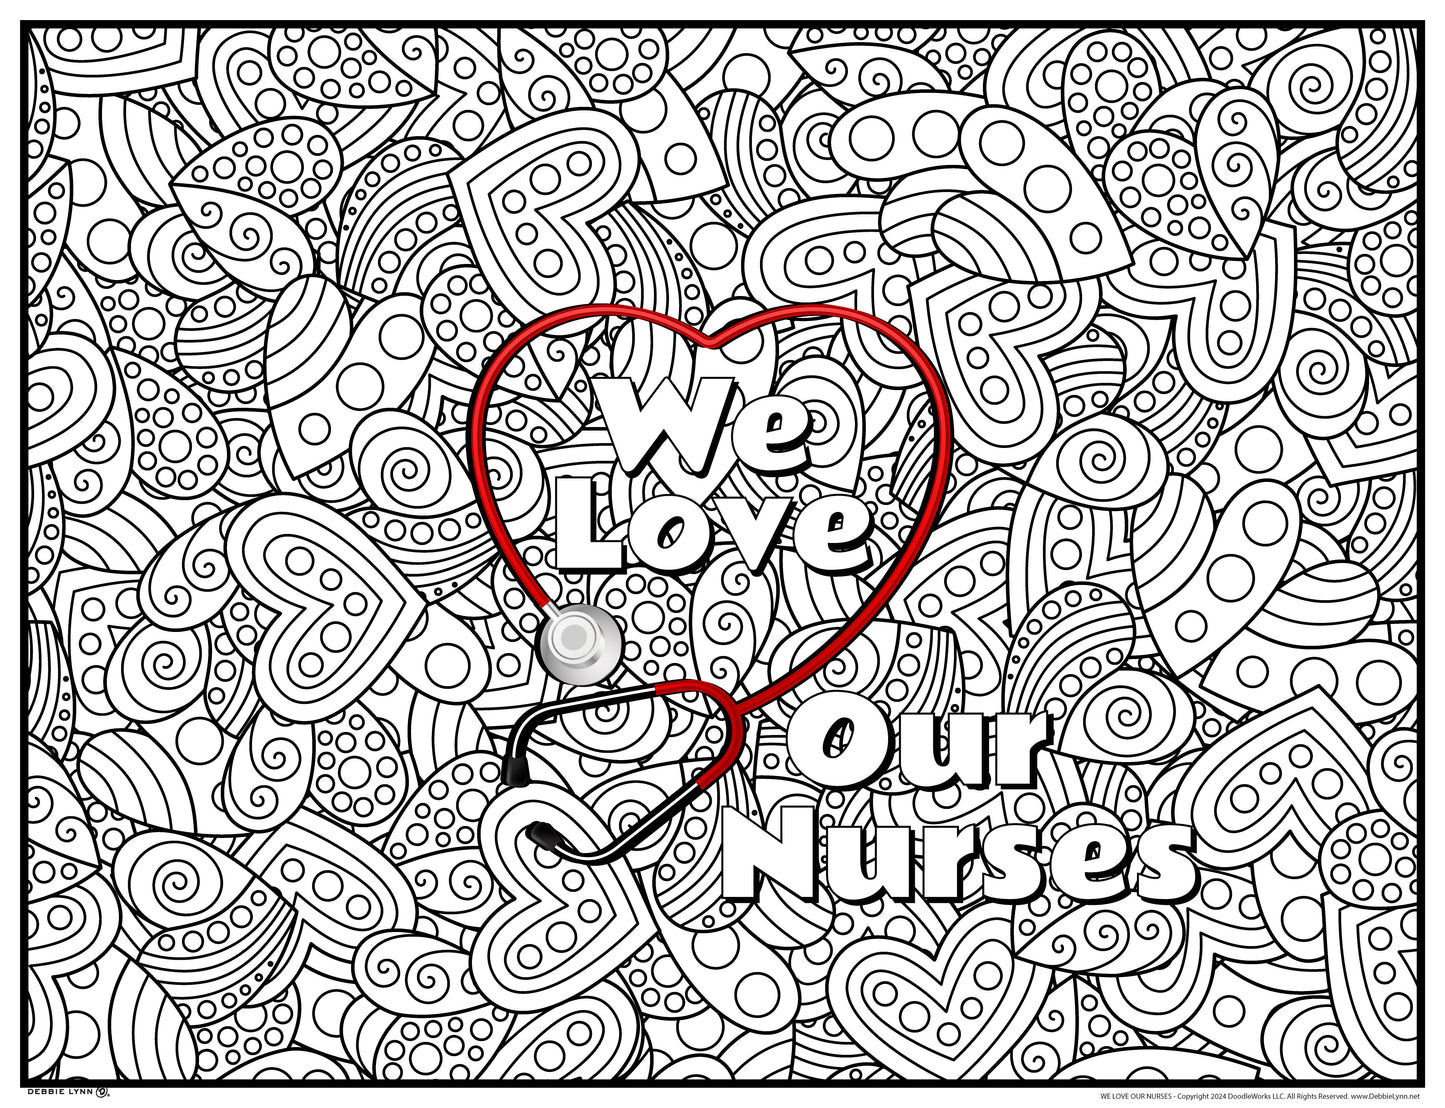 We Love Our Nurses Personalized Giant Coloring Poster 46"x60"